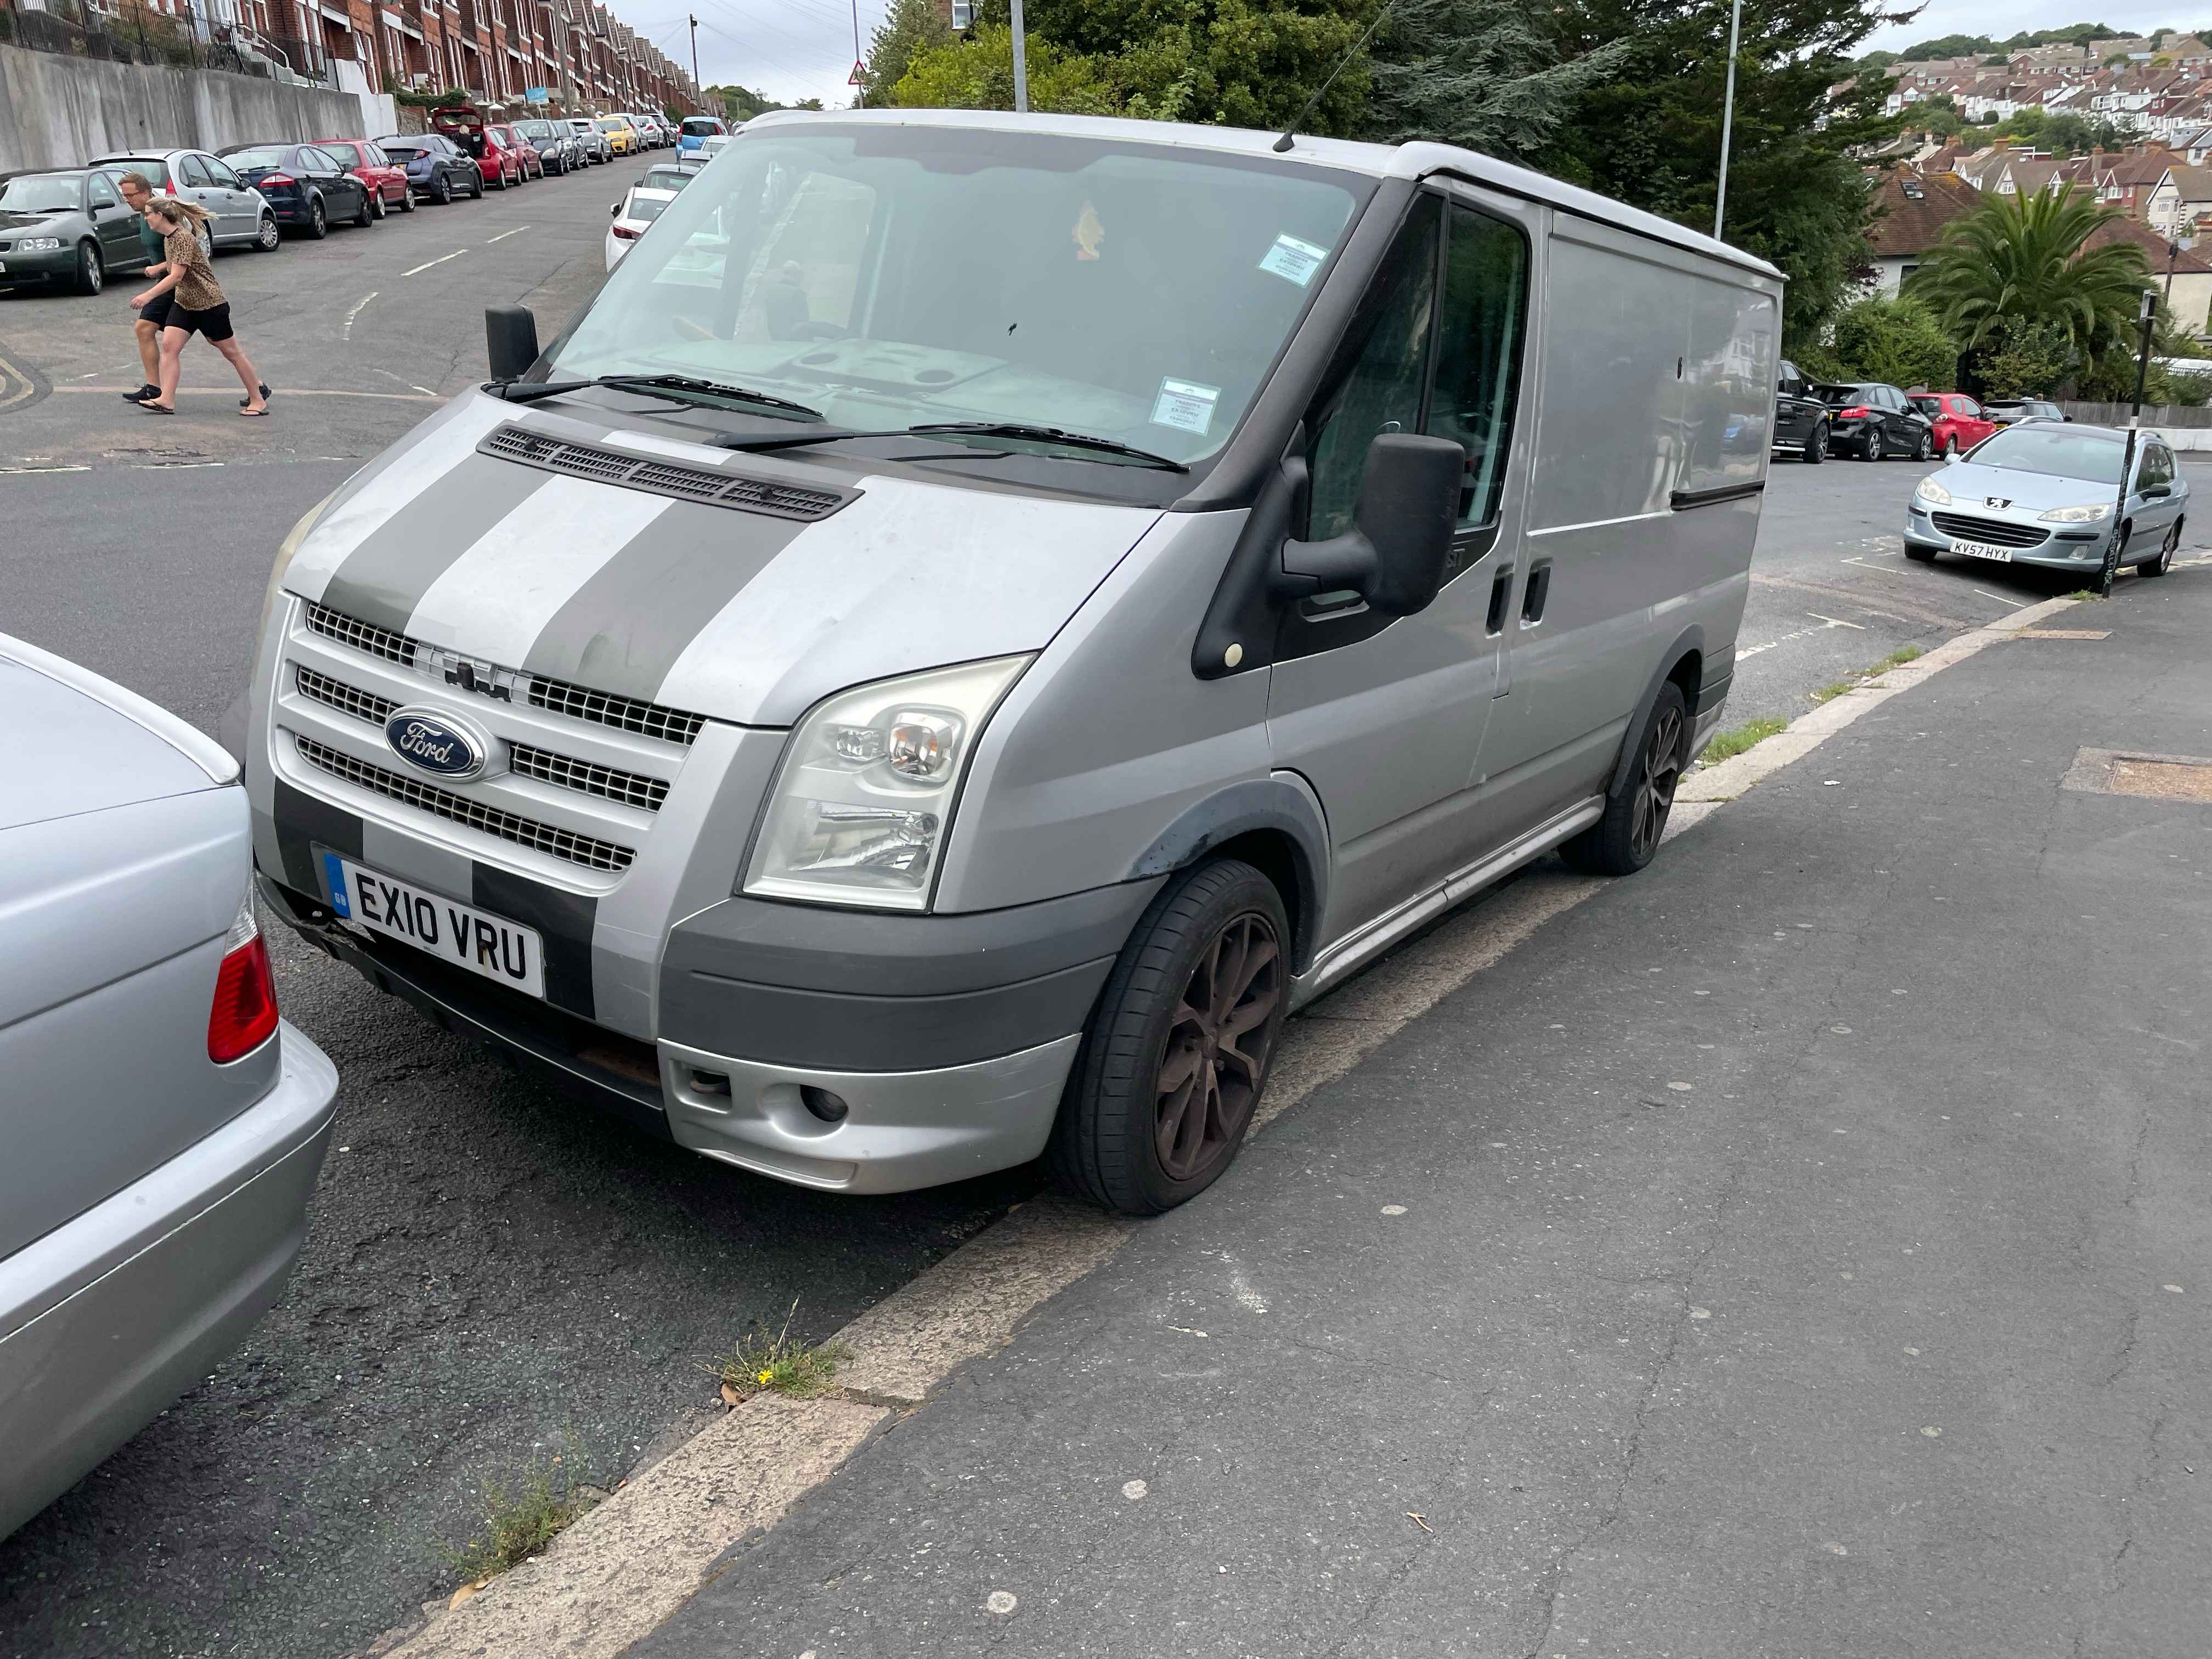 Photograph of EX10 VRU - a Silver Ford Transit parked in Hollingdean by a non-resident. The first of ten photographs supplied by the residents of Hollingdean.